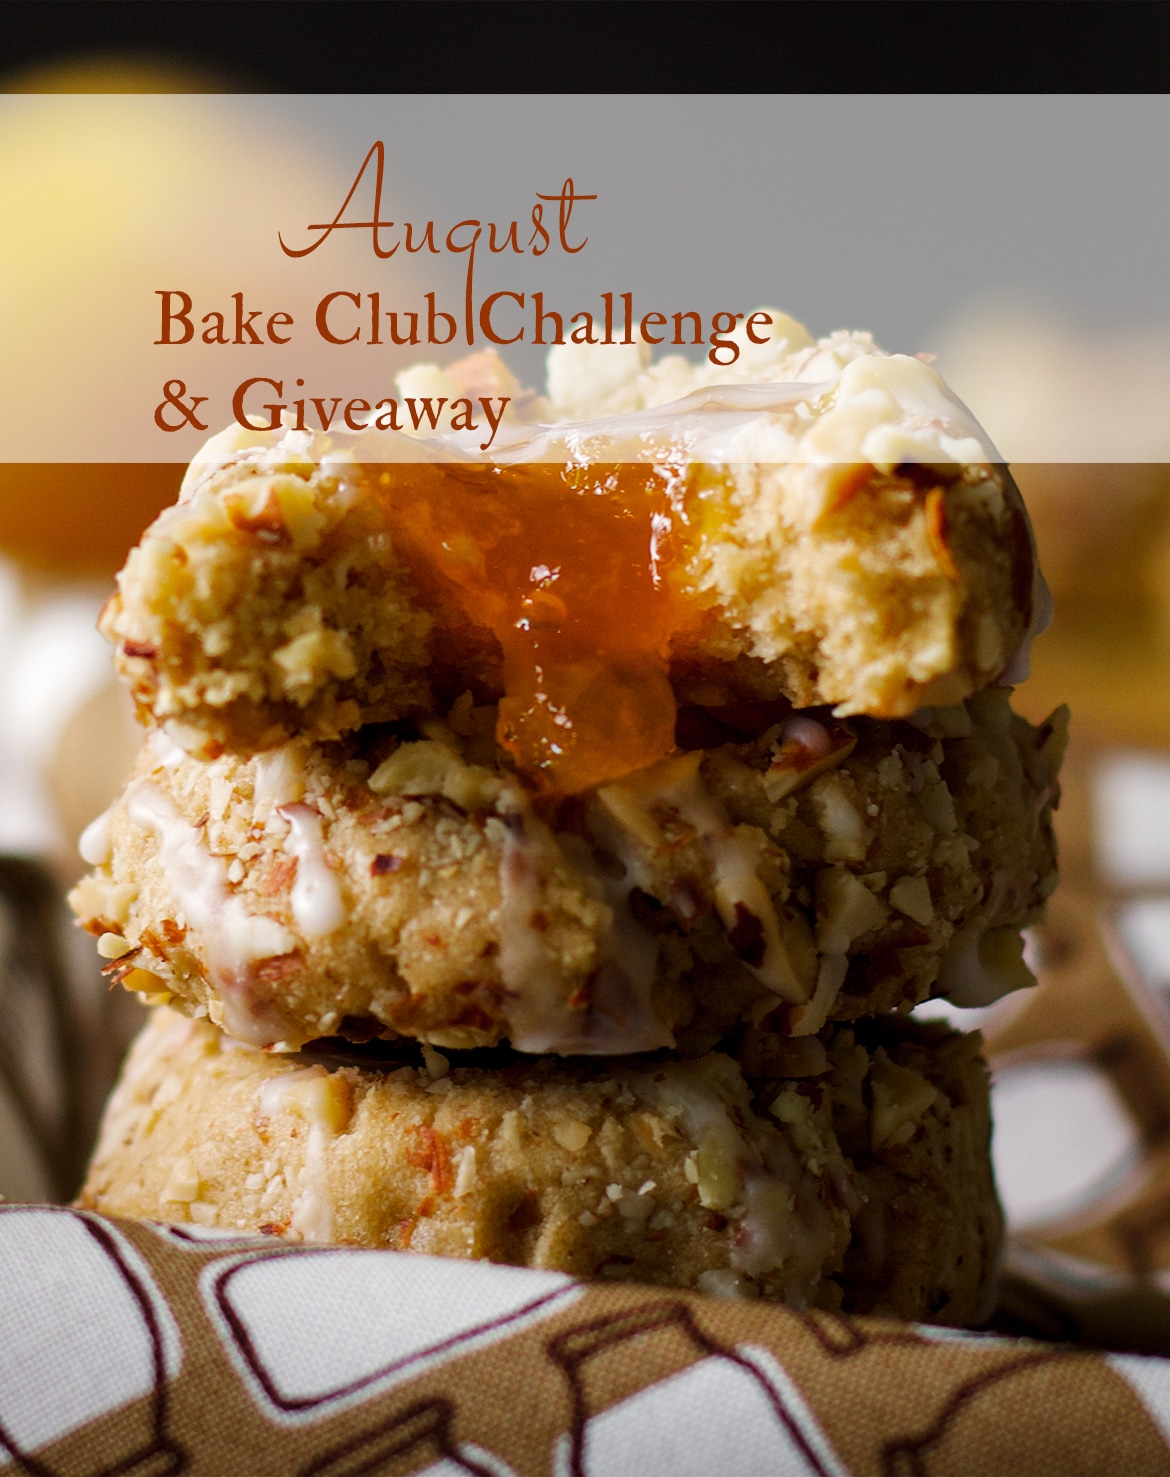 The August Bake Club Challenge is Peach Almond Thumbprint Cookies